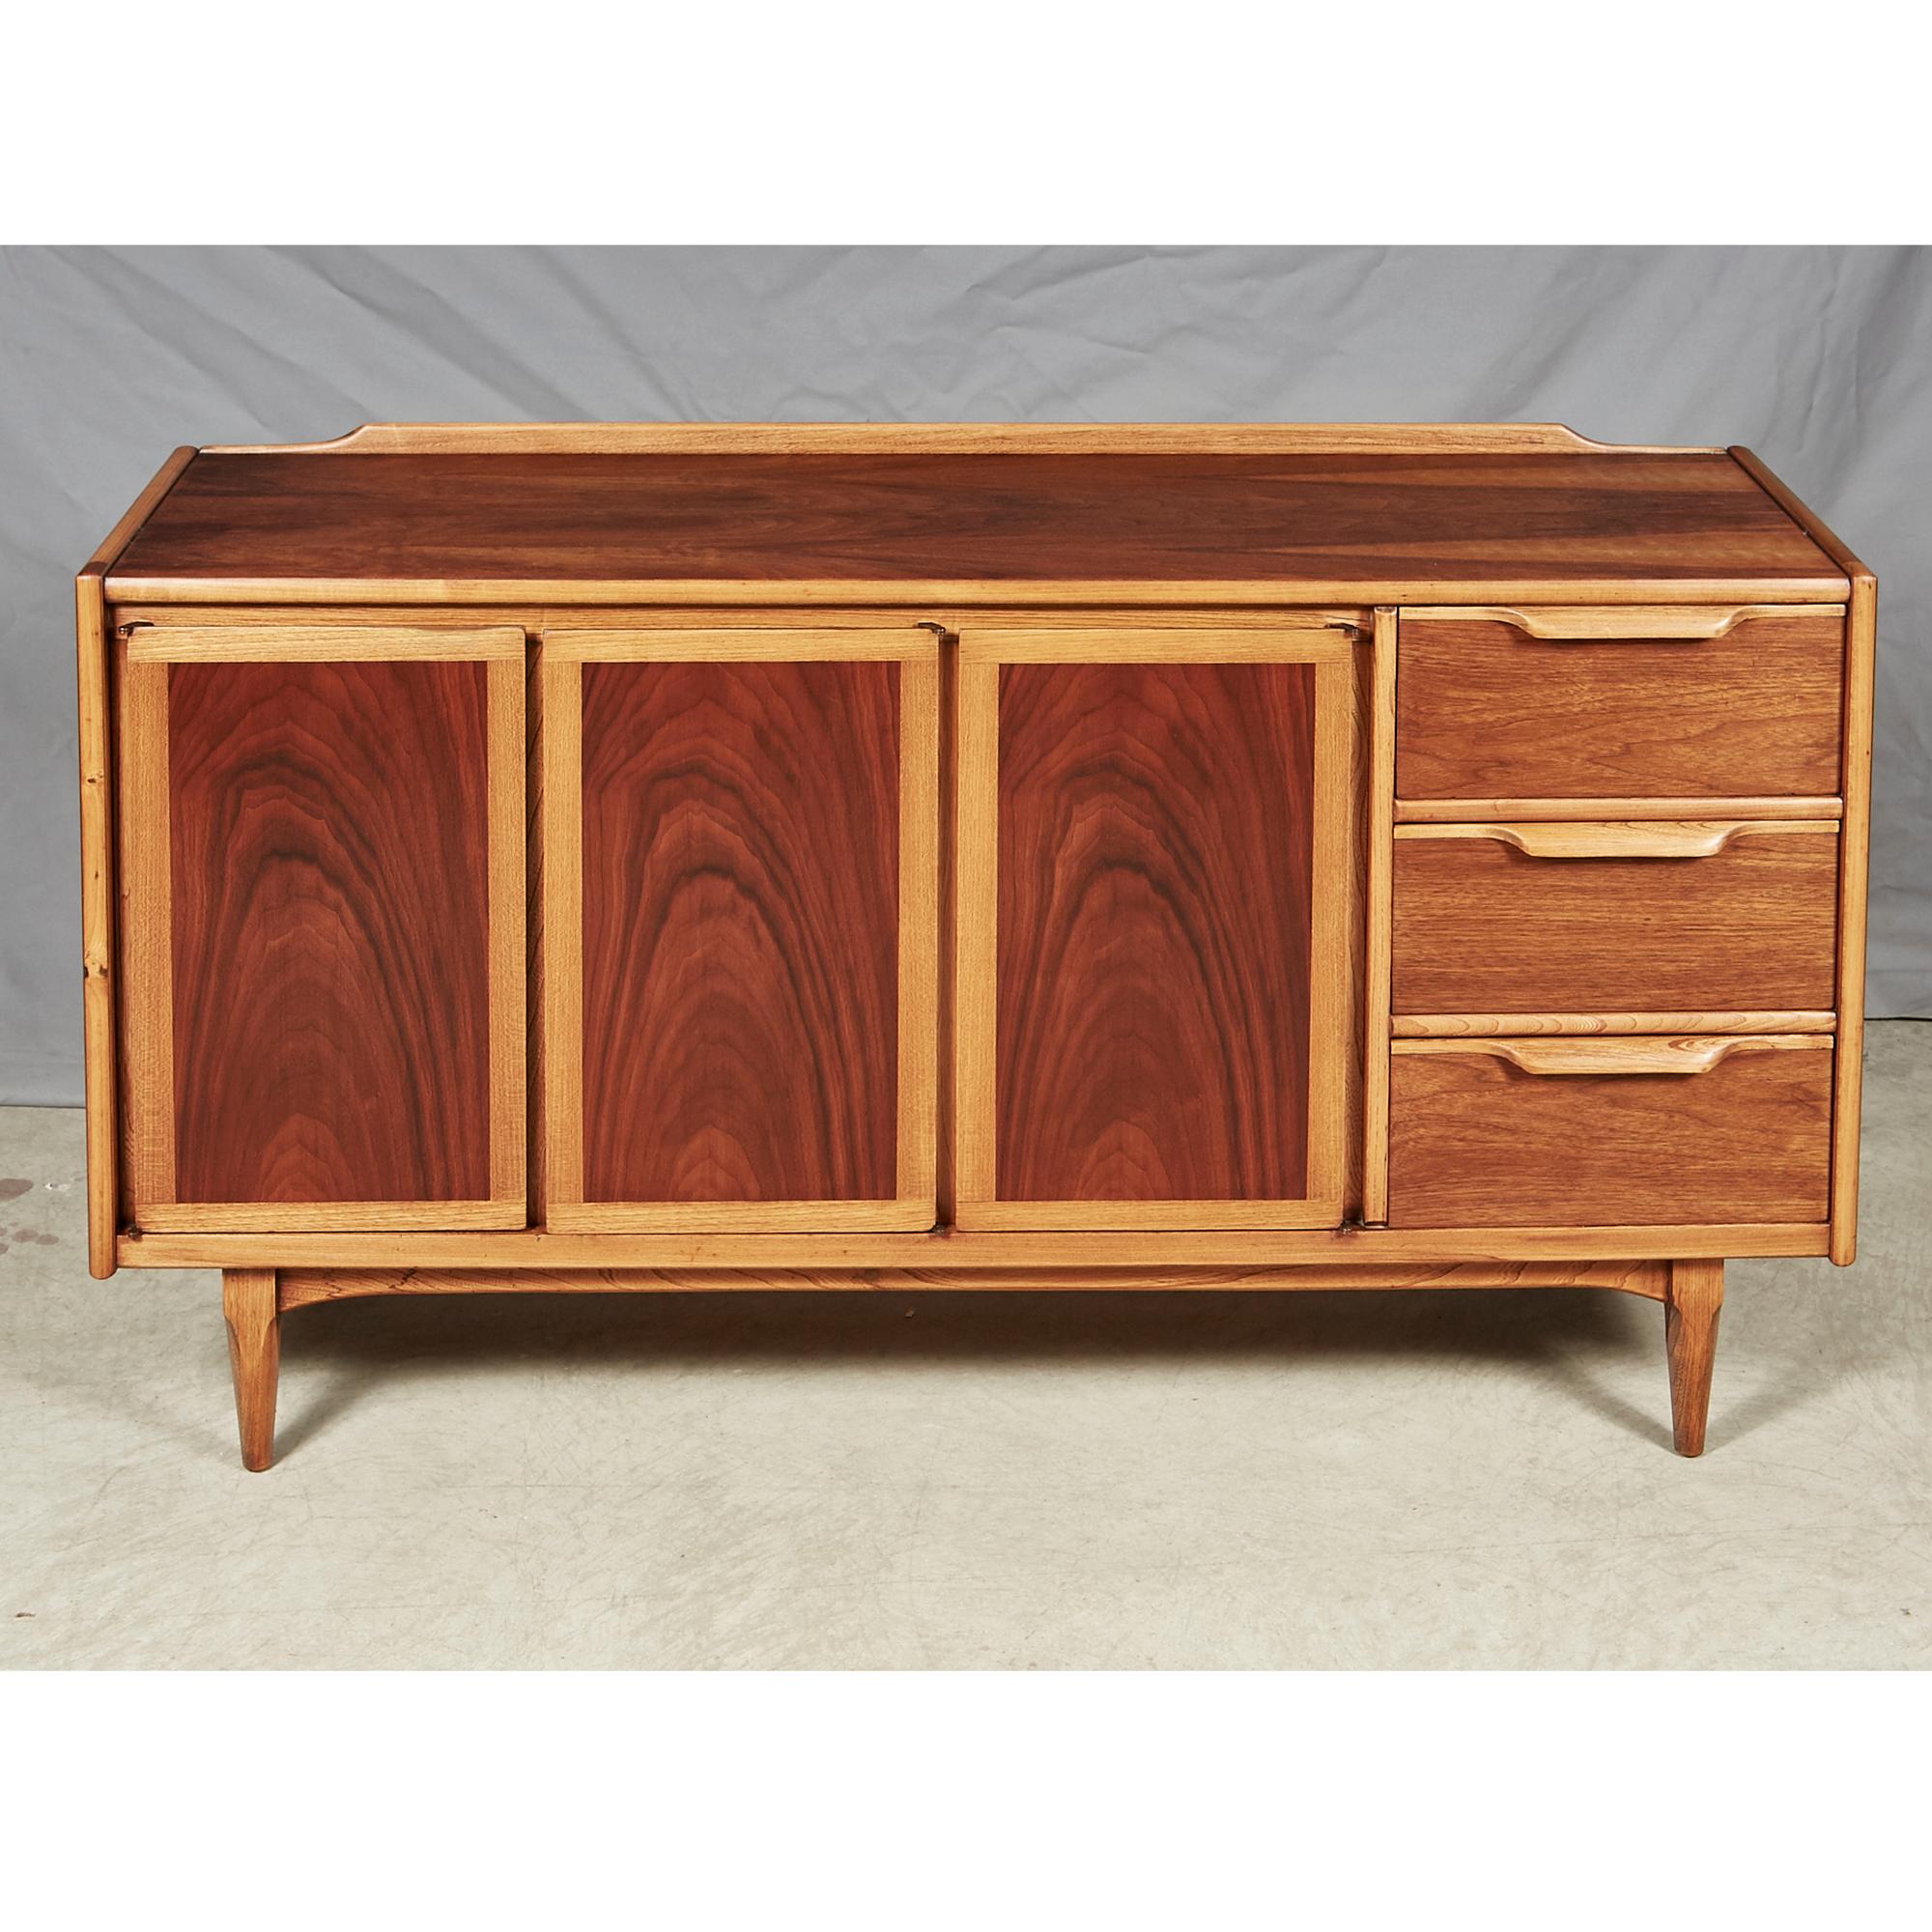 Vintage 1960s walnut and ash wood credenza designed by Lane Furniture Co. The credenza has three drawers and shelving for storage. Fully restored and in excellent condition.